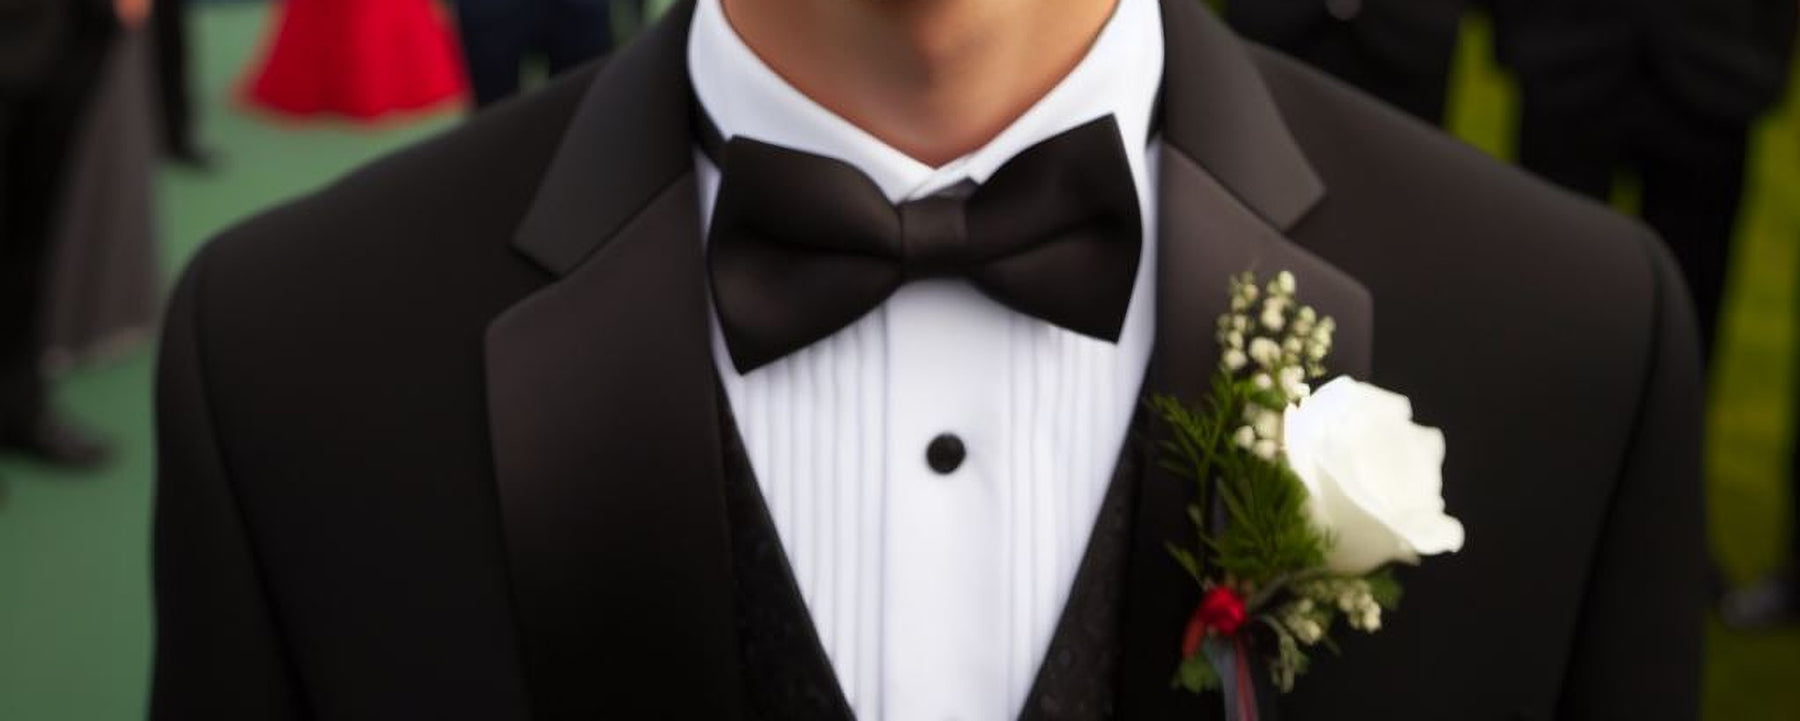 Best Prom Tuxedos For Under 300$